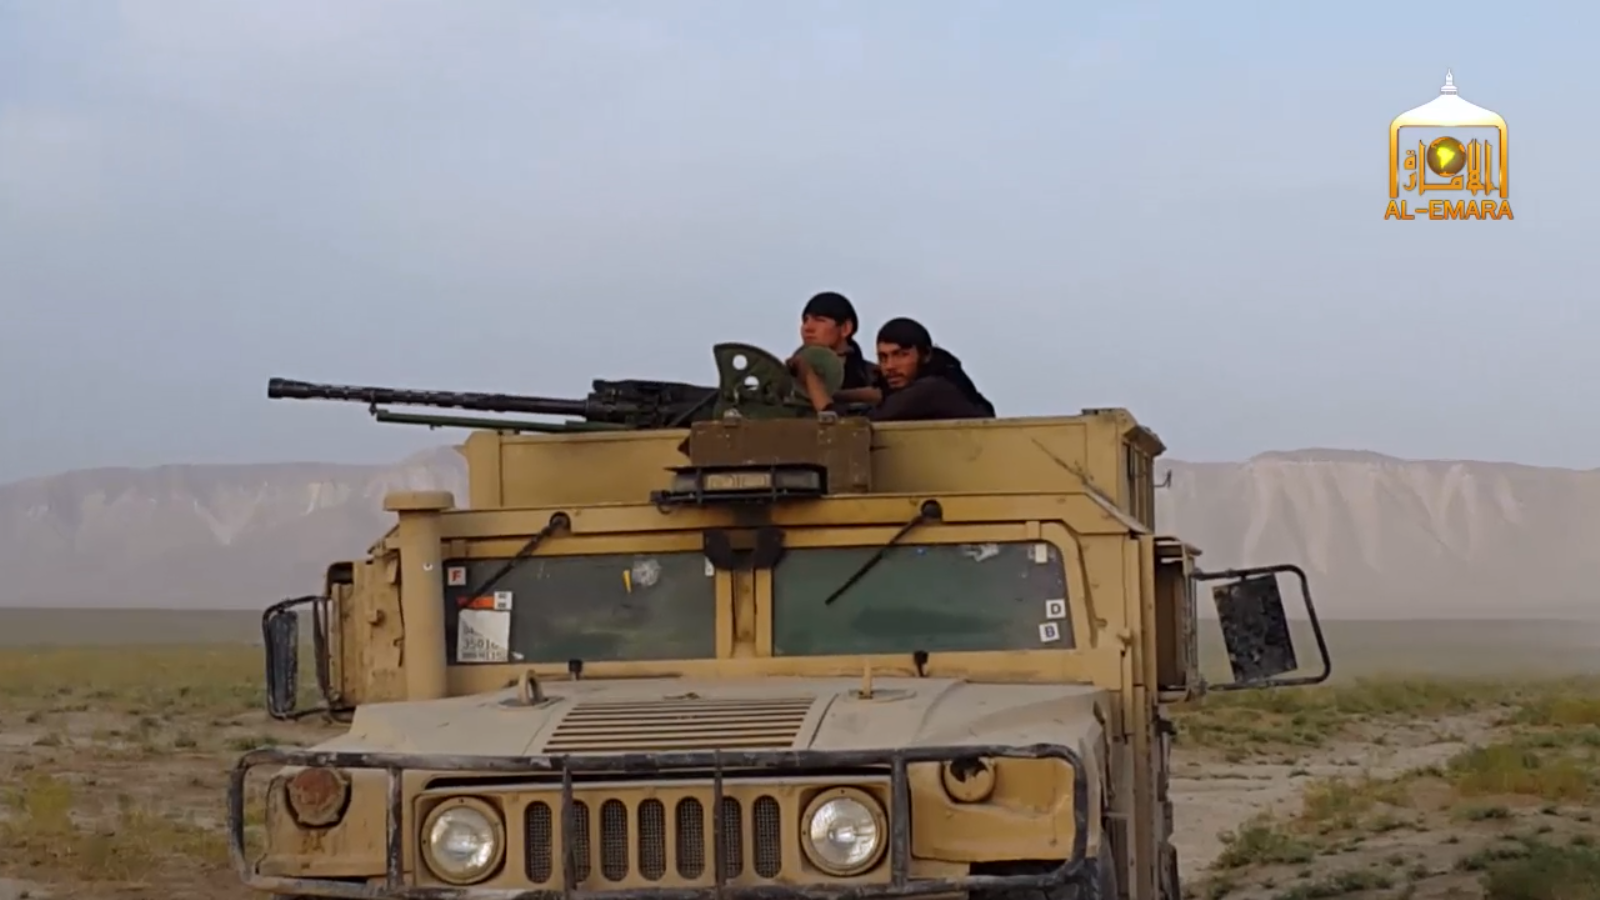 Members of the Afghan Taliban atop a captured Humvee with what appears to be an anti-aircraft weapon.